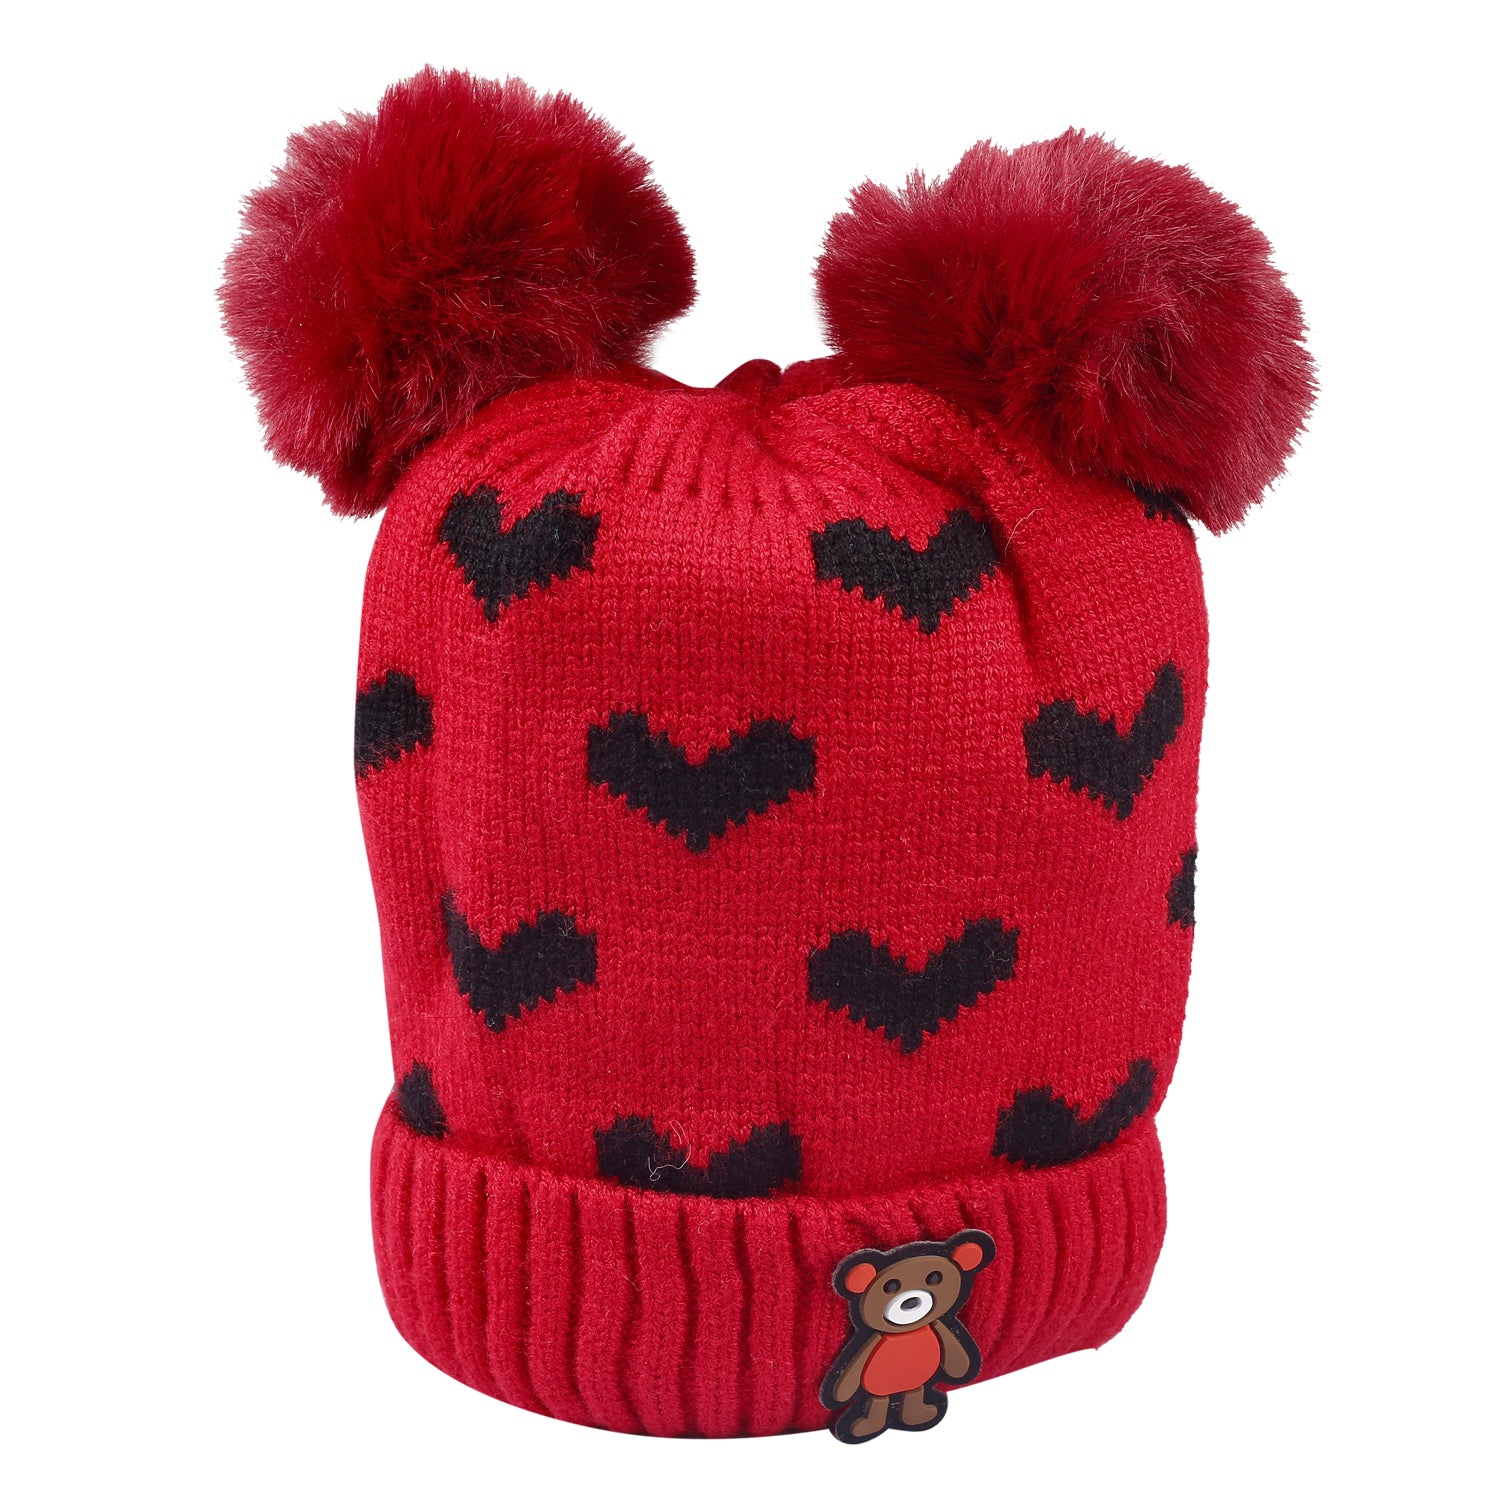 Pom Pom Hearts Red And Pink 2 Pk Woolen Cap - Baby Moo